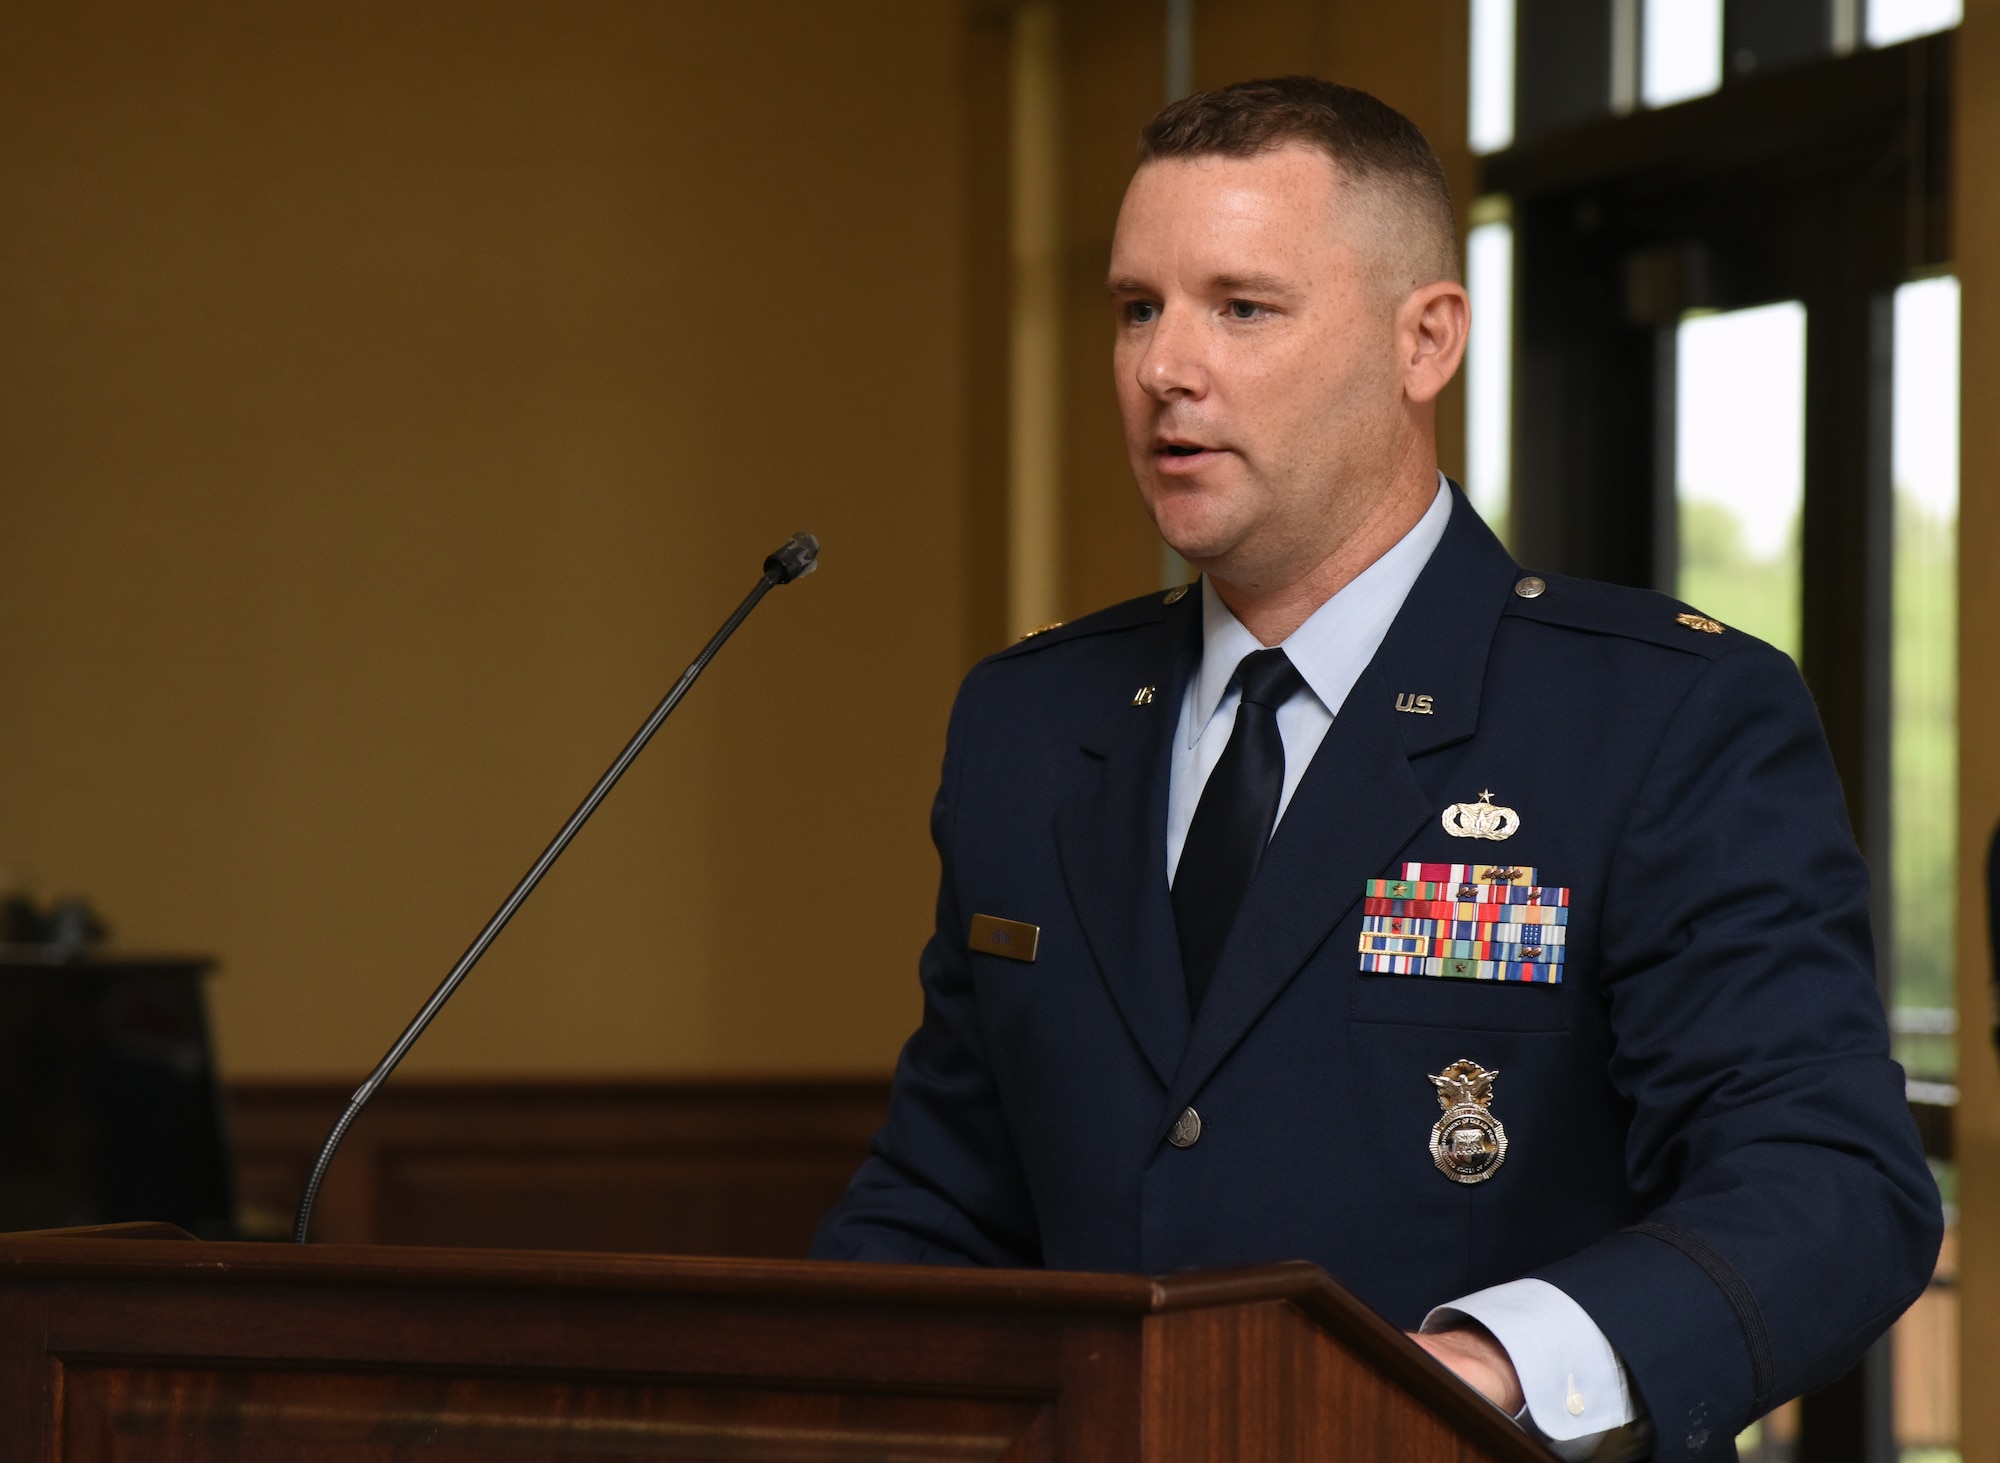 U.S. Air Force Maj. Matthew Lowe, incoming 81st Security Forces Squadron commander, delivers remarks during the 81st SFS change of command ceremony inside the Bay Breeze Event Center at Keesler Air Force Base, Mississippi, May 31, 2019. Prior to becoming the 81st SFS commander, Lowe was the Officer Training School Deputy Chief of Standards and Evaluation, at Maxwell Air Force Base, Alabama. (U.S. Air Force photo by Kemberly Groue)